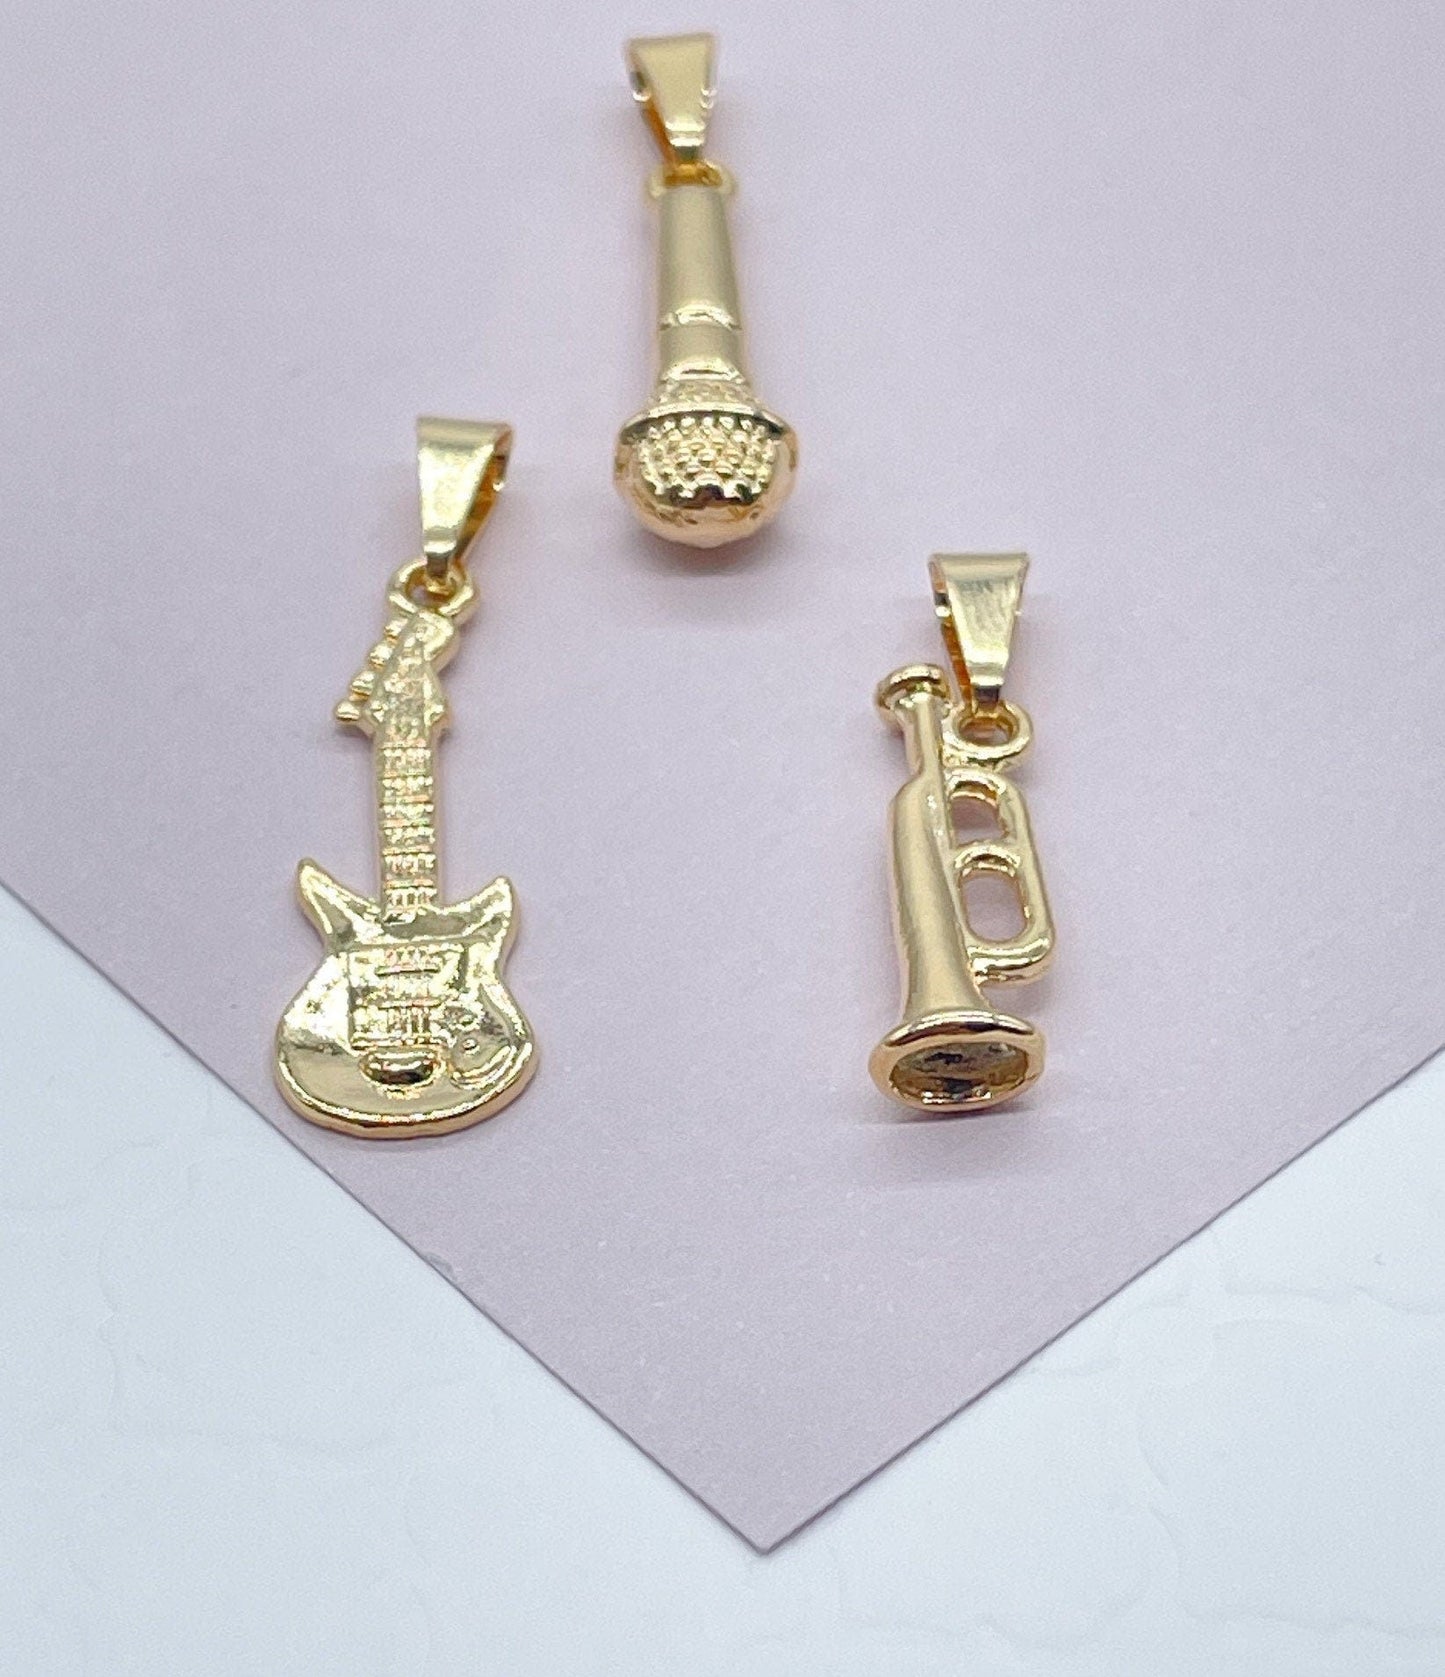 18k Gold Layered Musical Instruments Microphone, Guitar and Trumpet Charms For